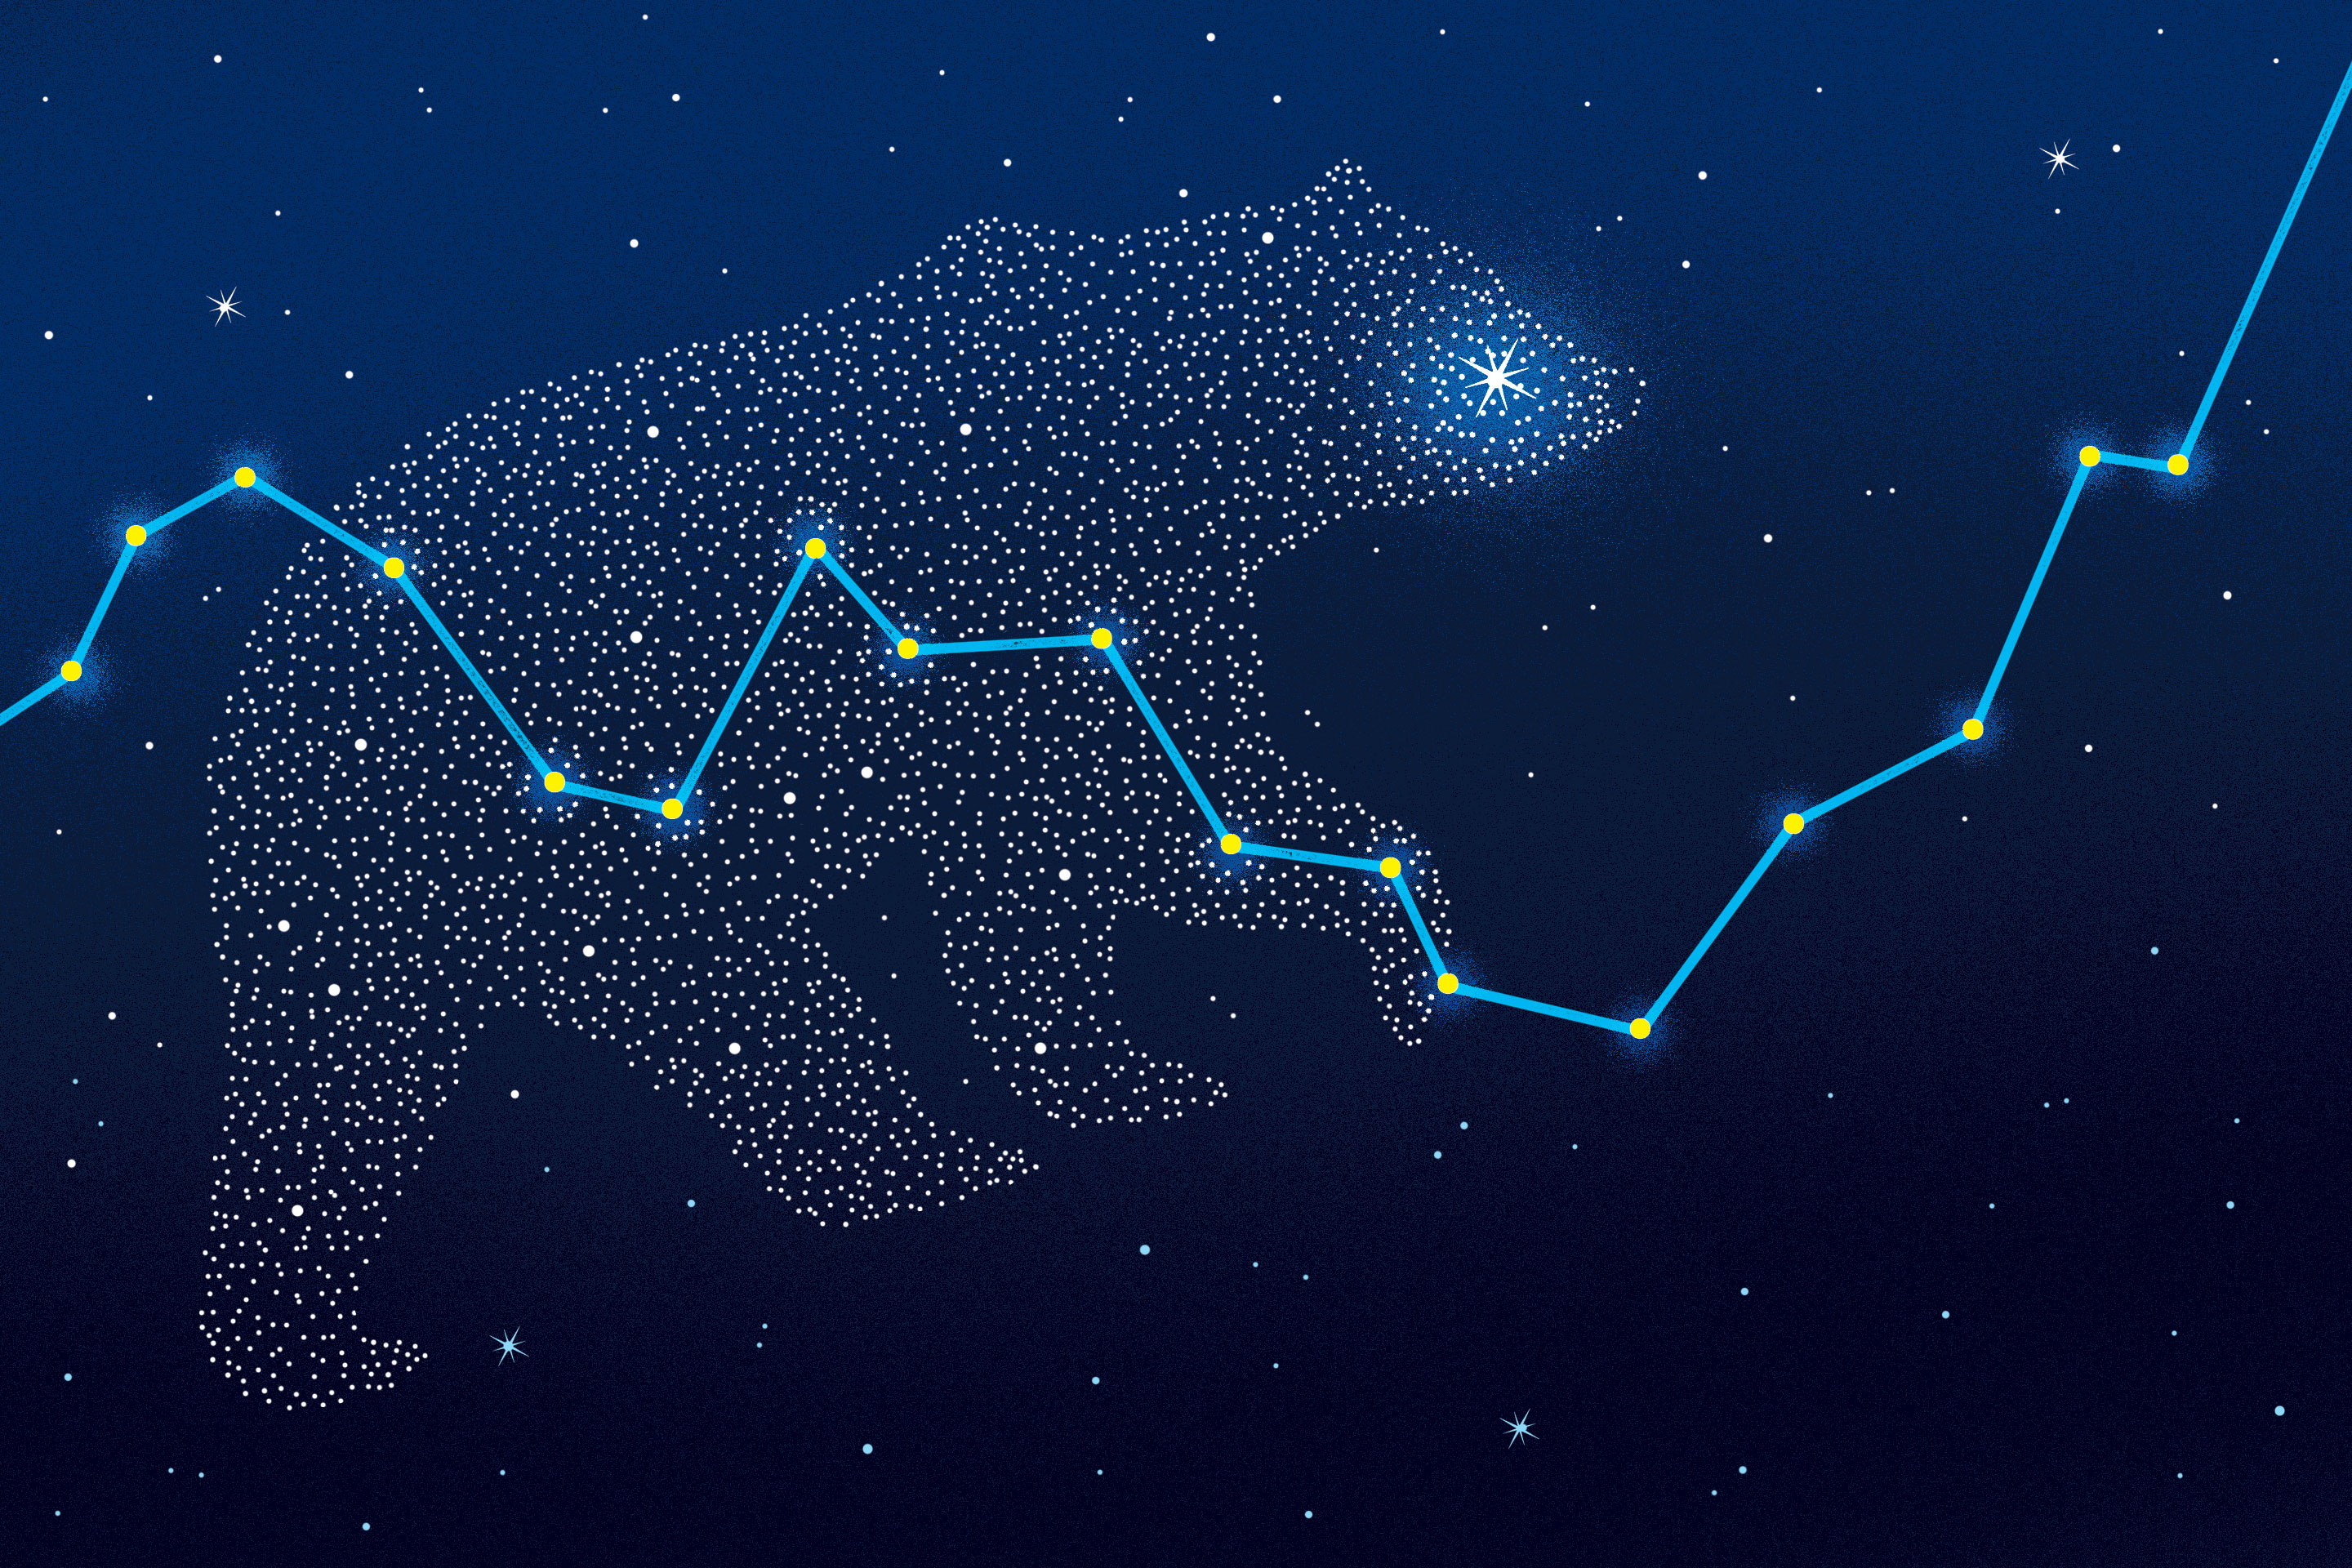 Illustration of starry sky with an image of a bear, created from small stars, and a stock market chart